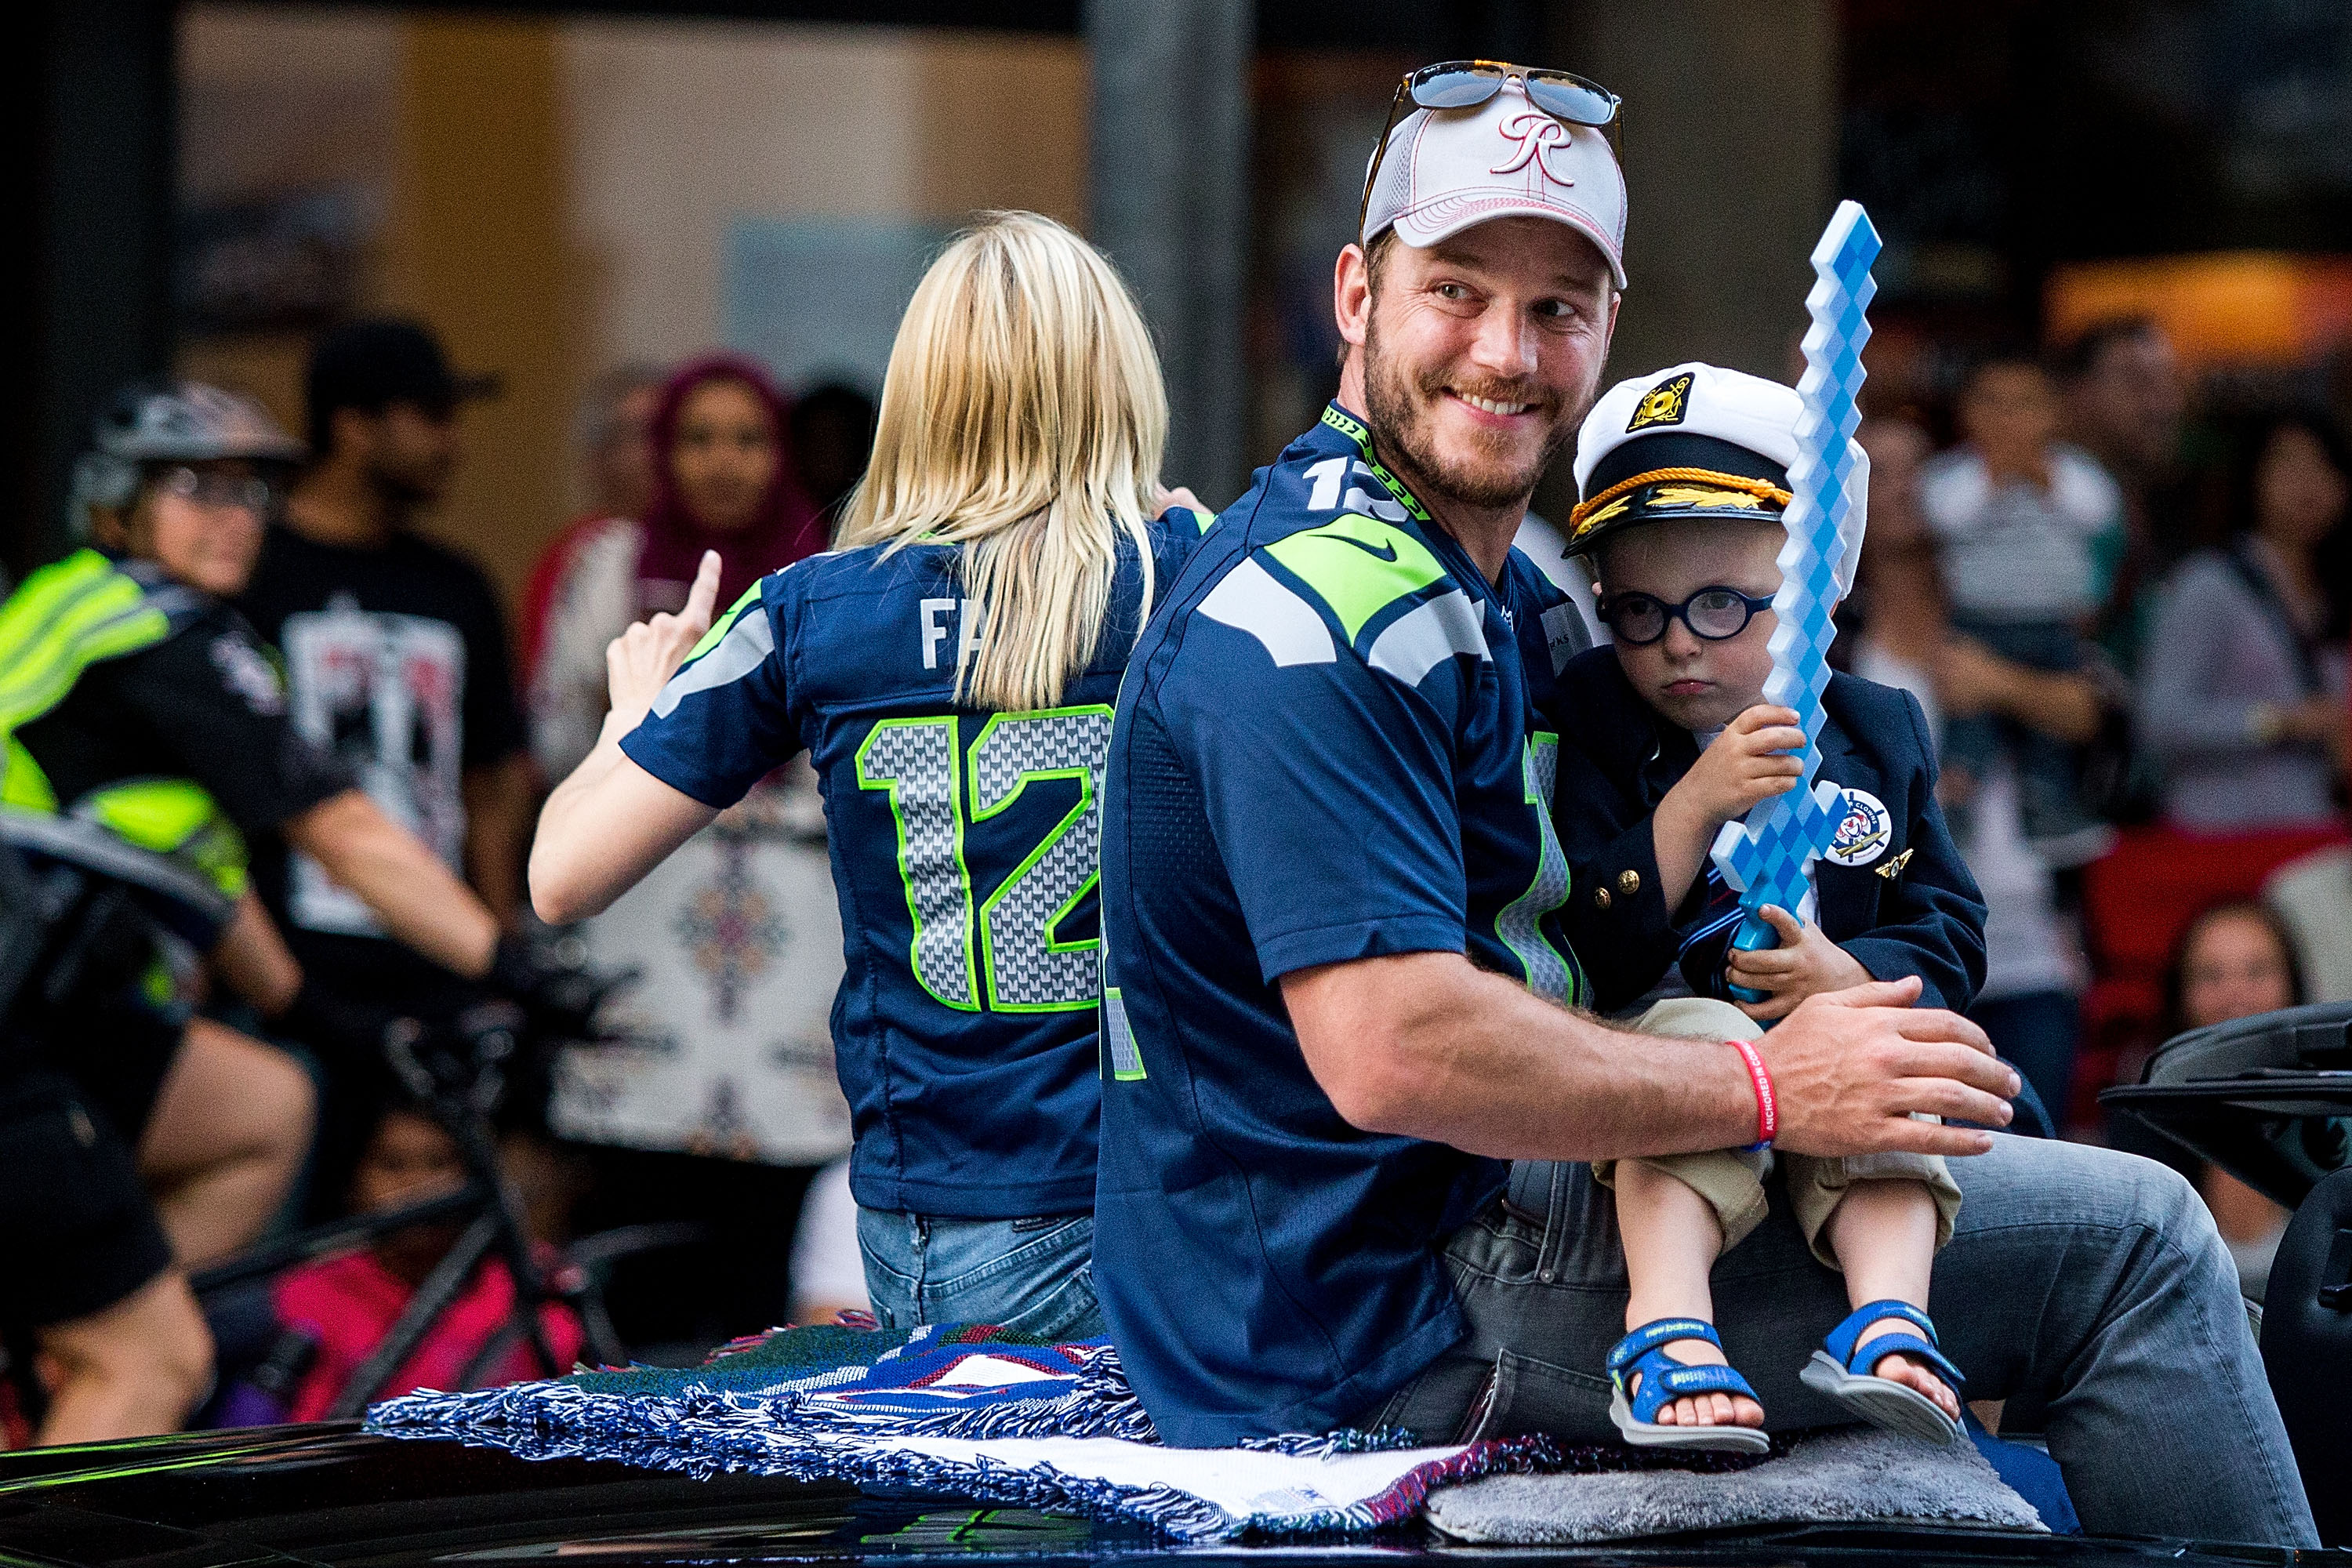 Chris Pratt and son Jack Pratt ride in the Seafair Torchlight Parade Grand Marshal vehicle on July 30, 2016 in Seattle, Washington | Source: Getty Images